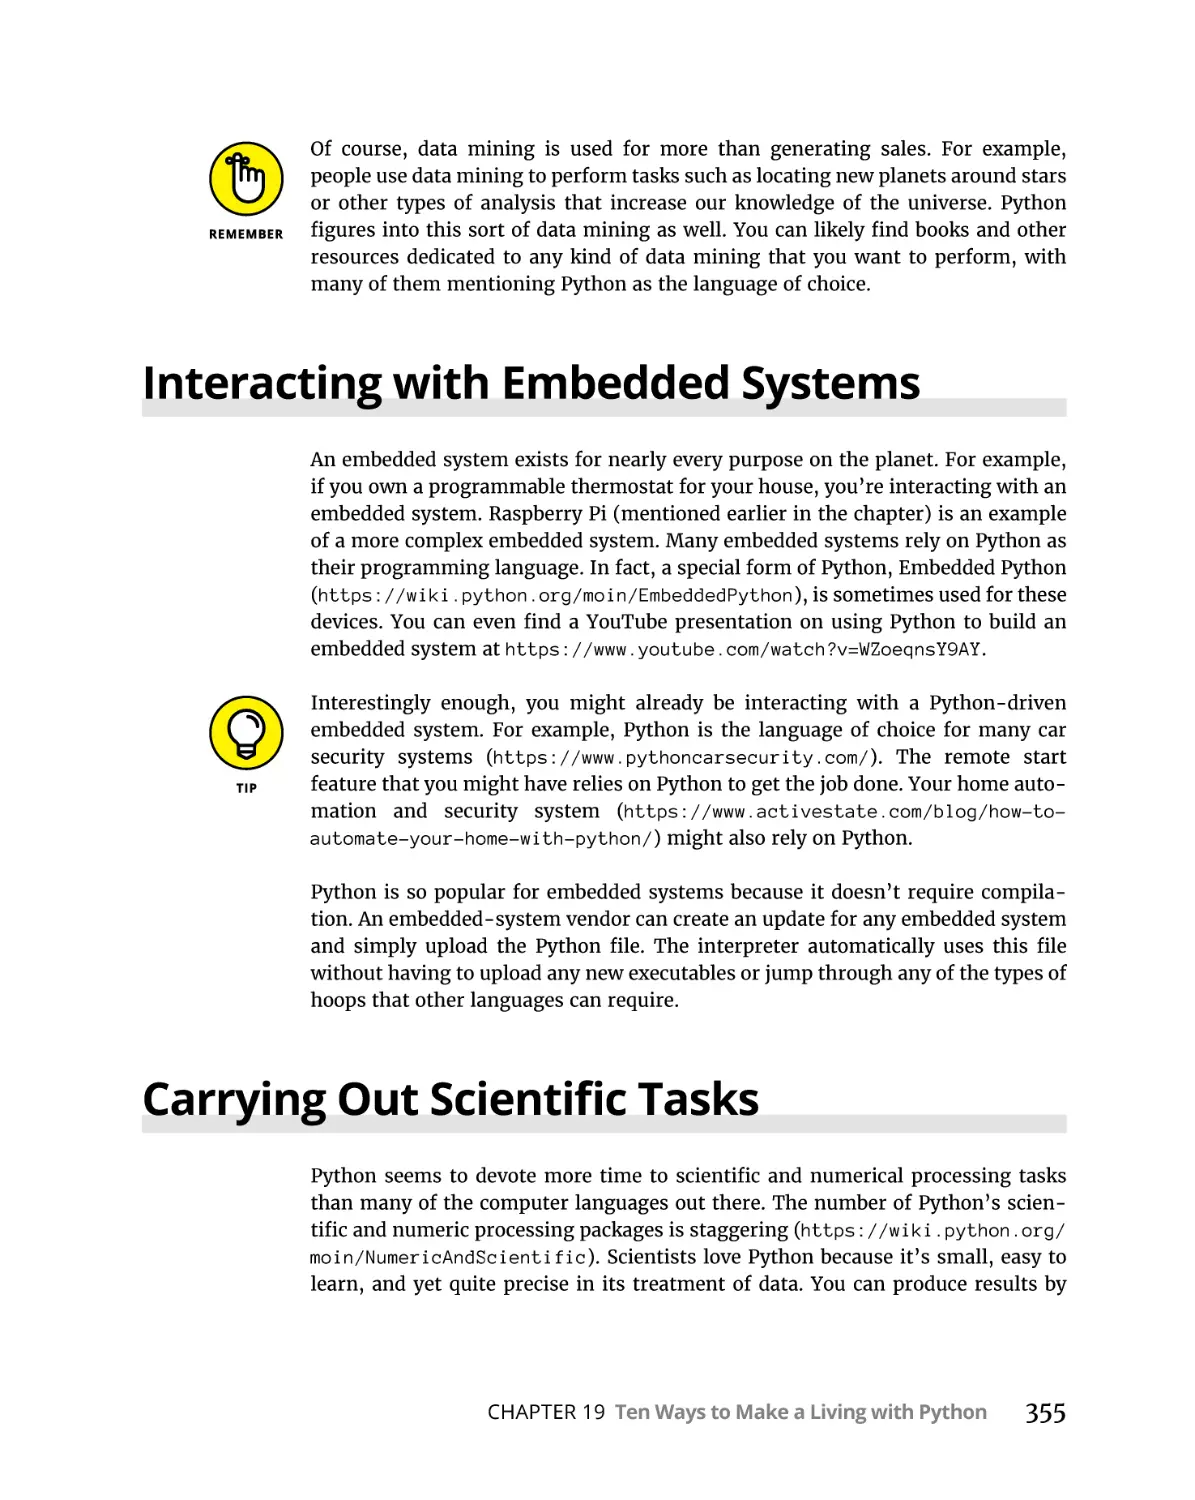 Interacting with Embedded Systems
Carrying Out Scientific Tasks